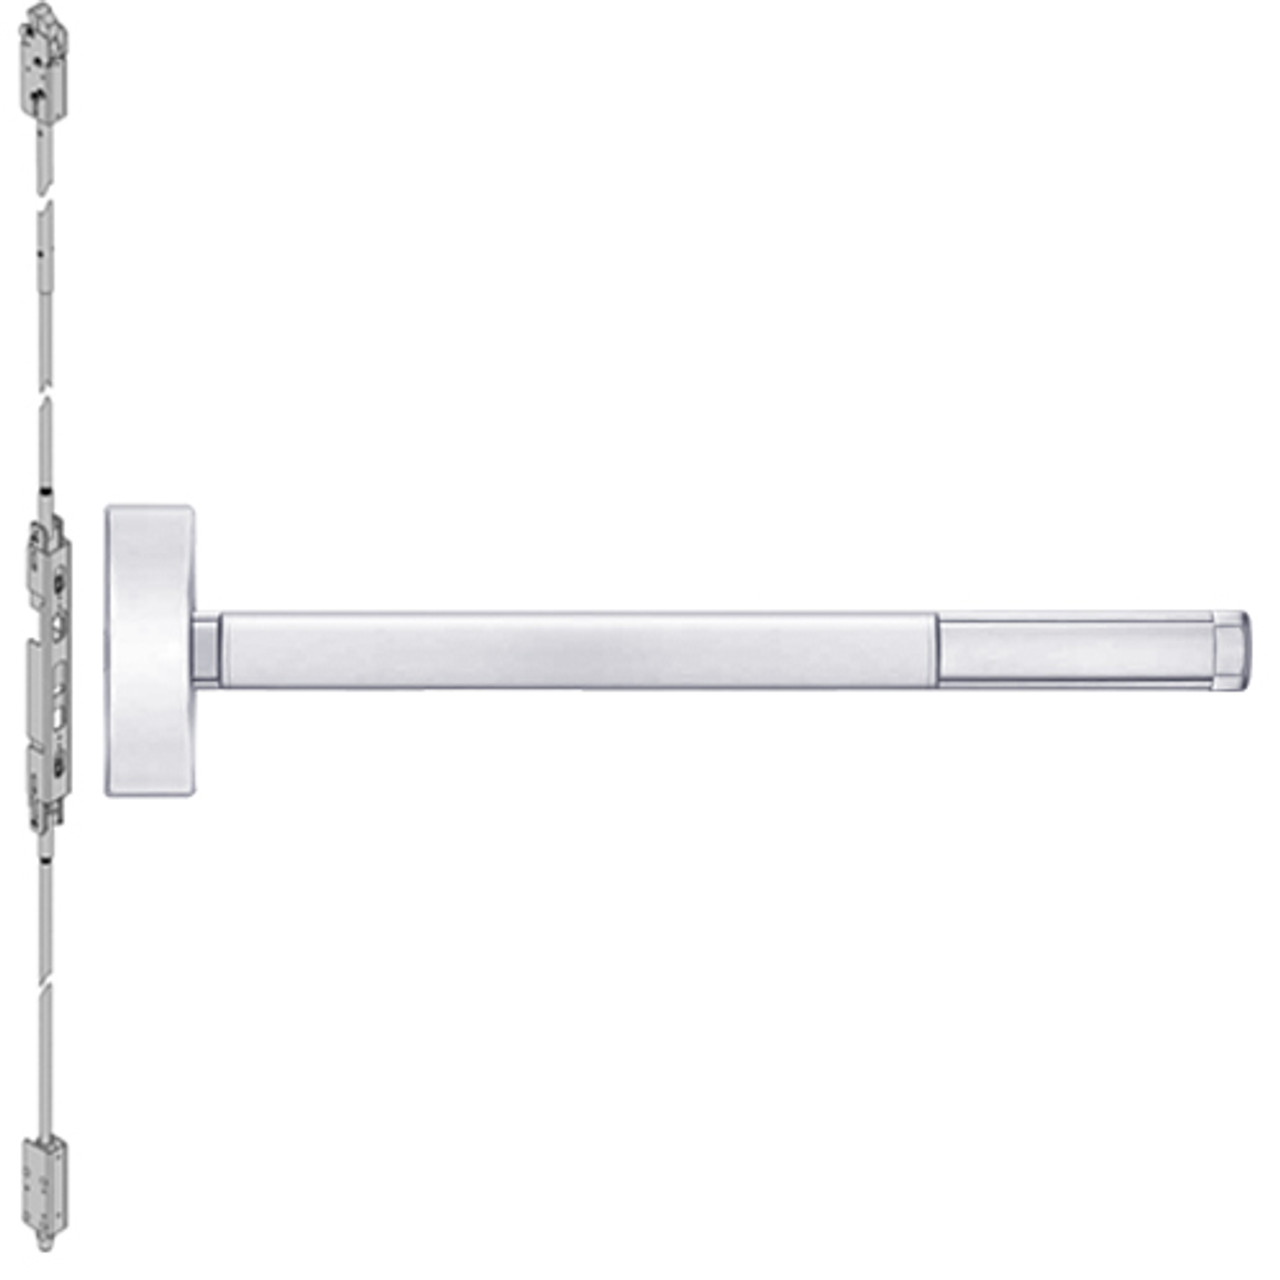 ELR2801-625-36 PHI 2800 Series Concealed Vertical Rod Exit Device with Electric Latch Retraction Prepped for Cover Plate in Bright Chrome Finish